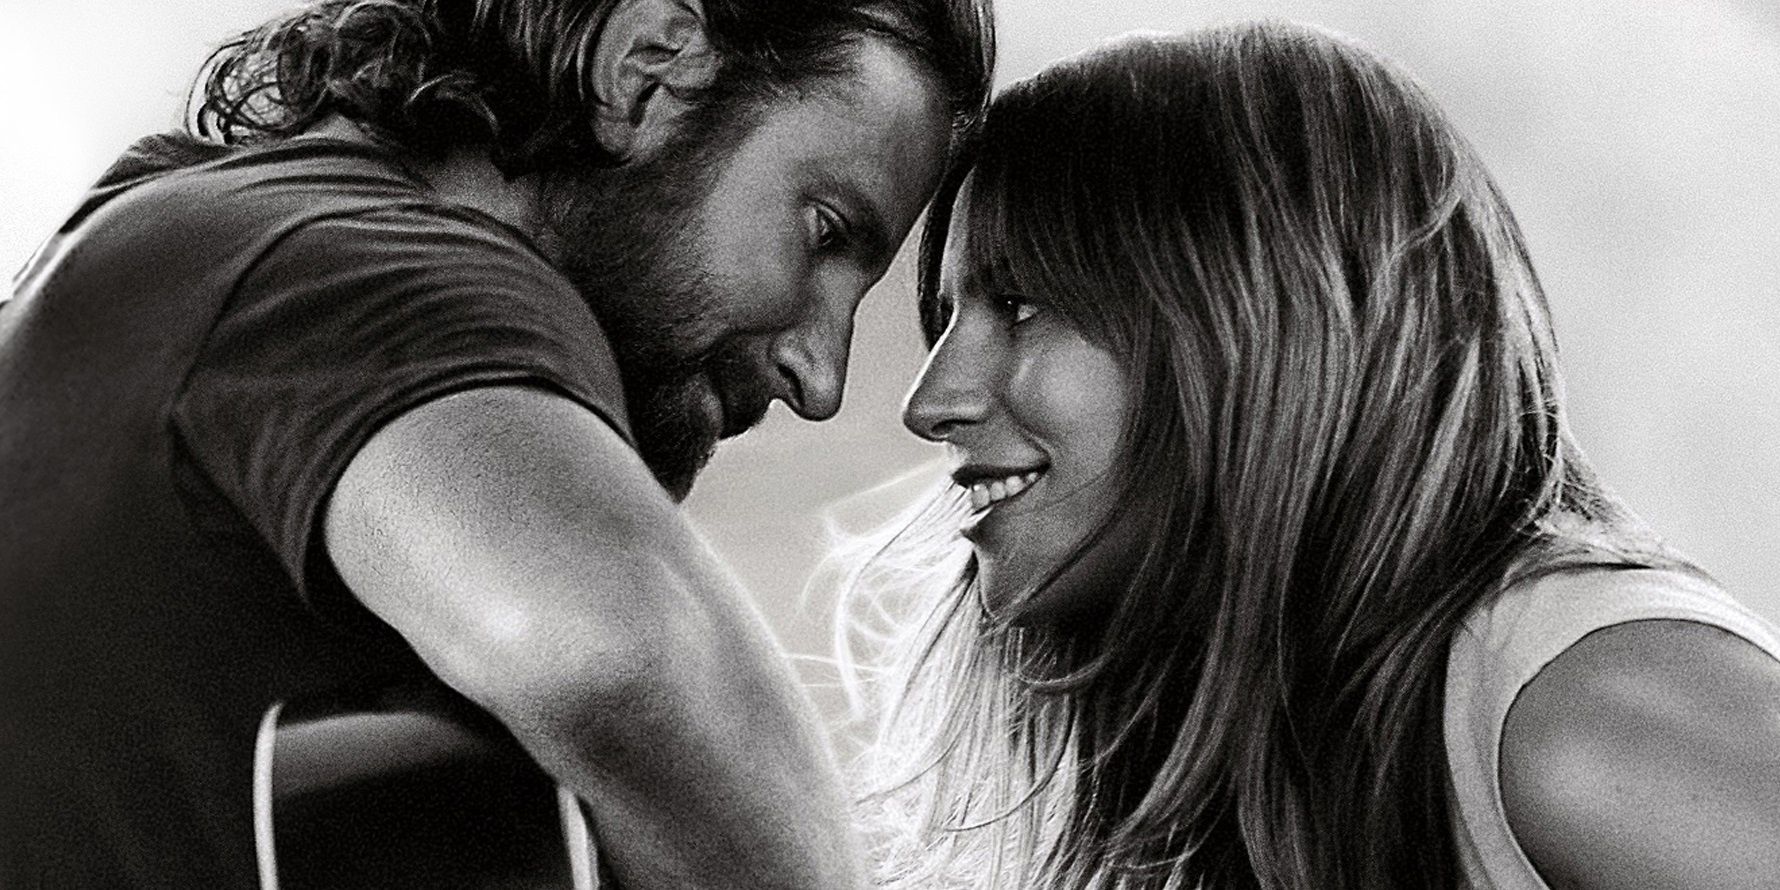 Lady Gaga and Bradley Cooper in A Star is Born, ​sitting close intimately playing guitar.